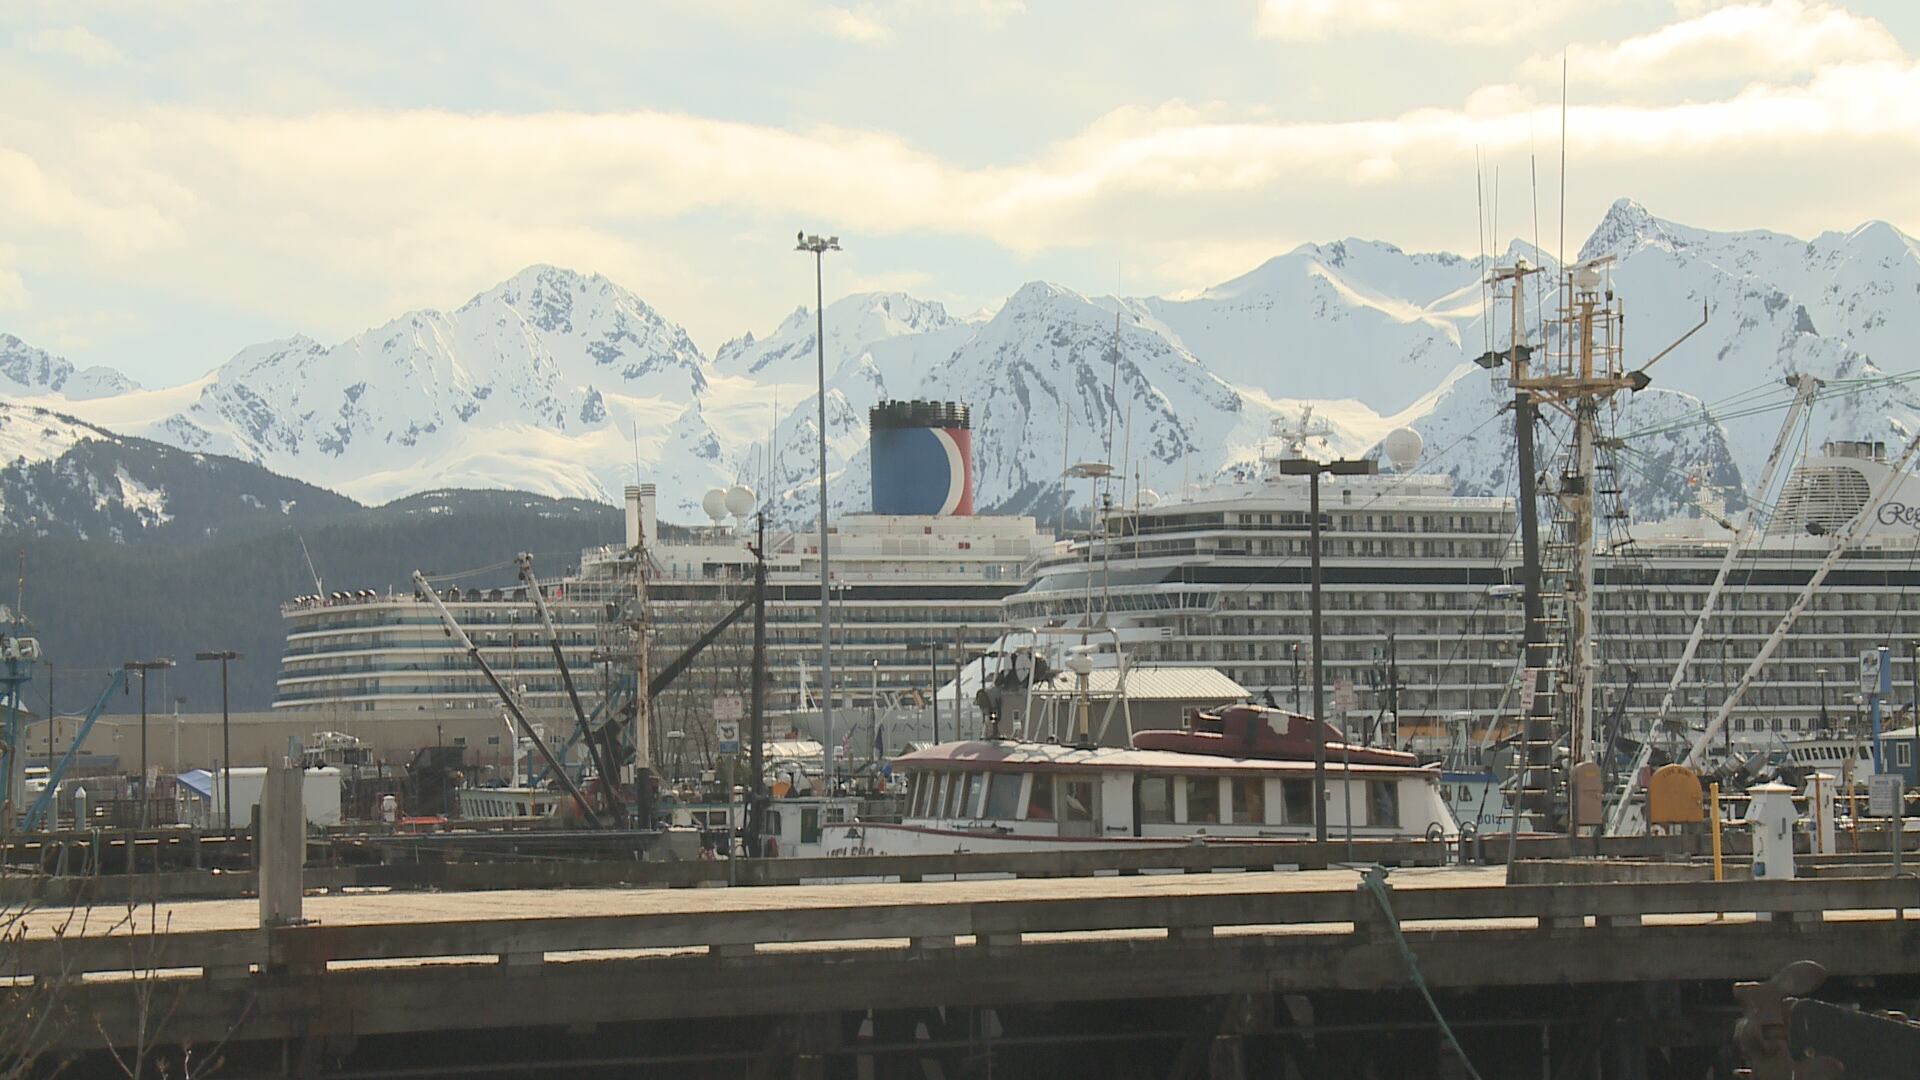 Seward sees its second day of cruise ships for the season.